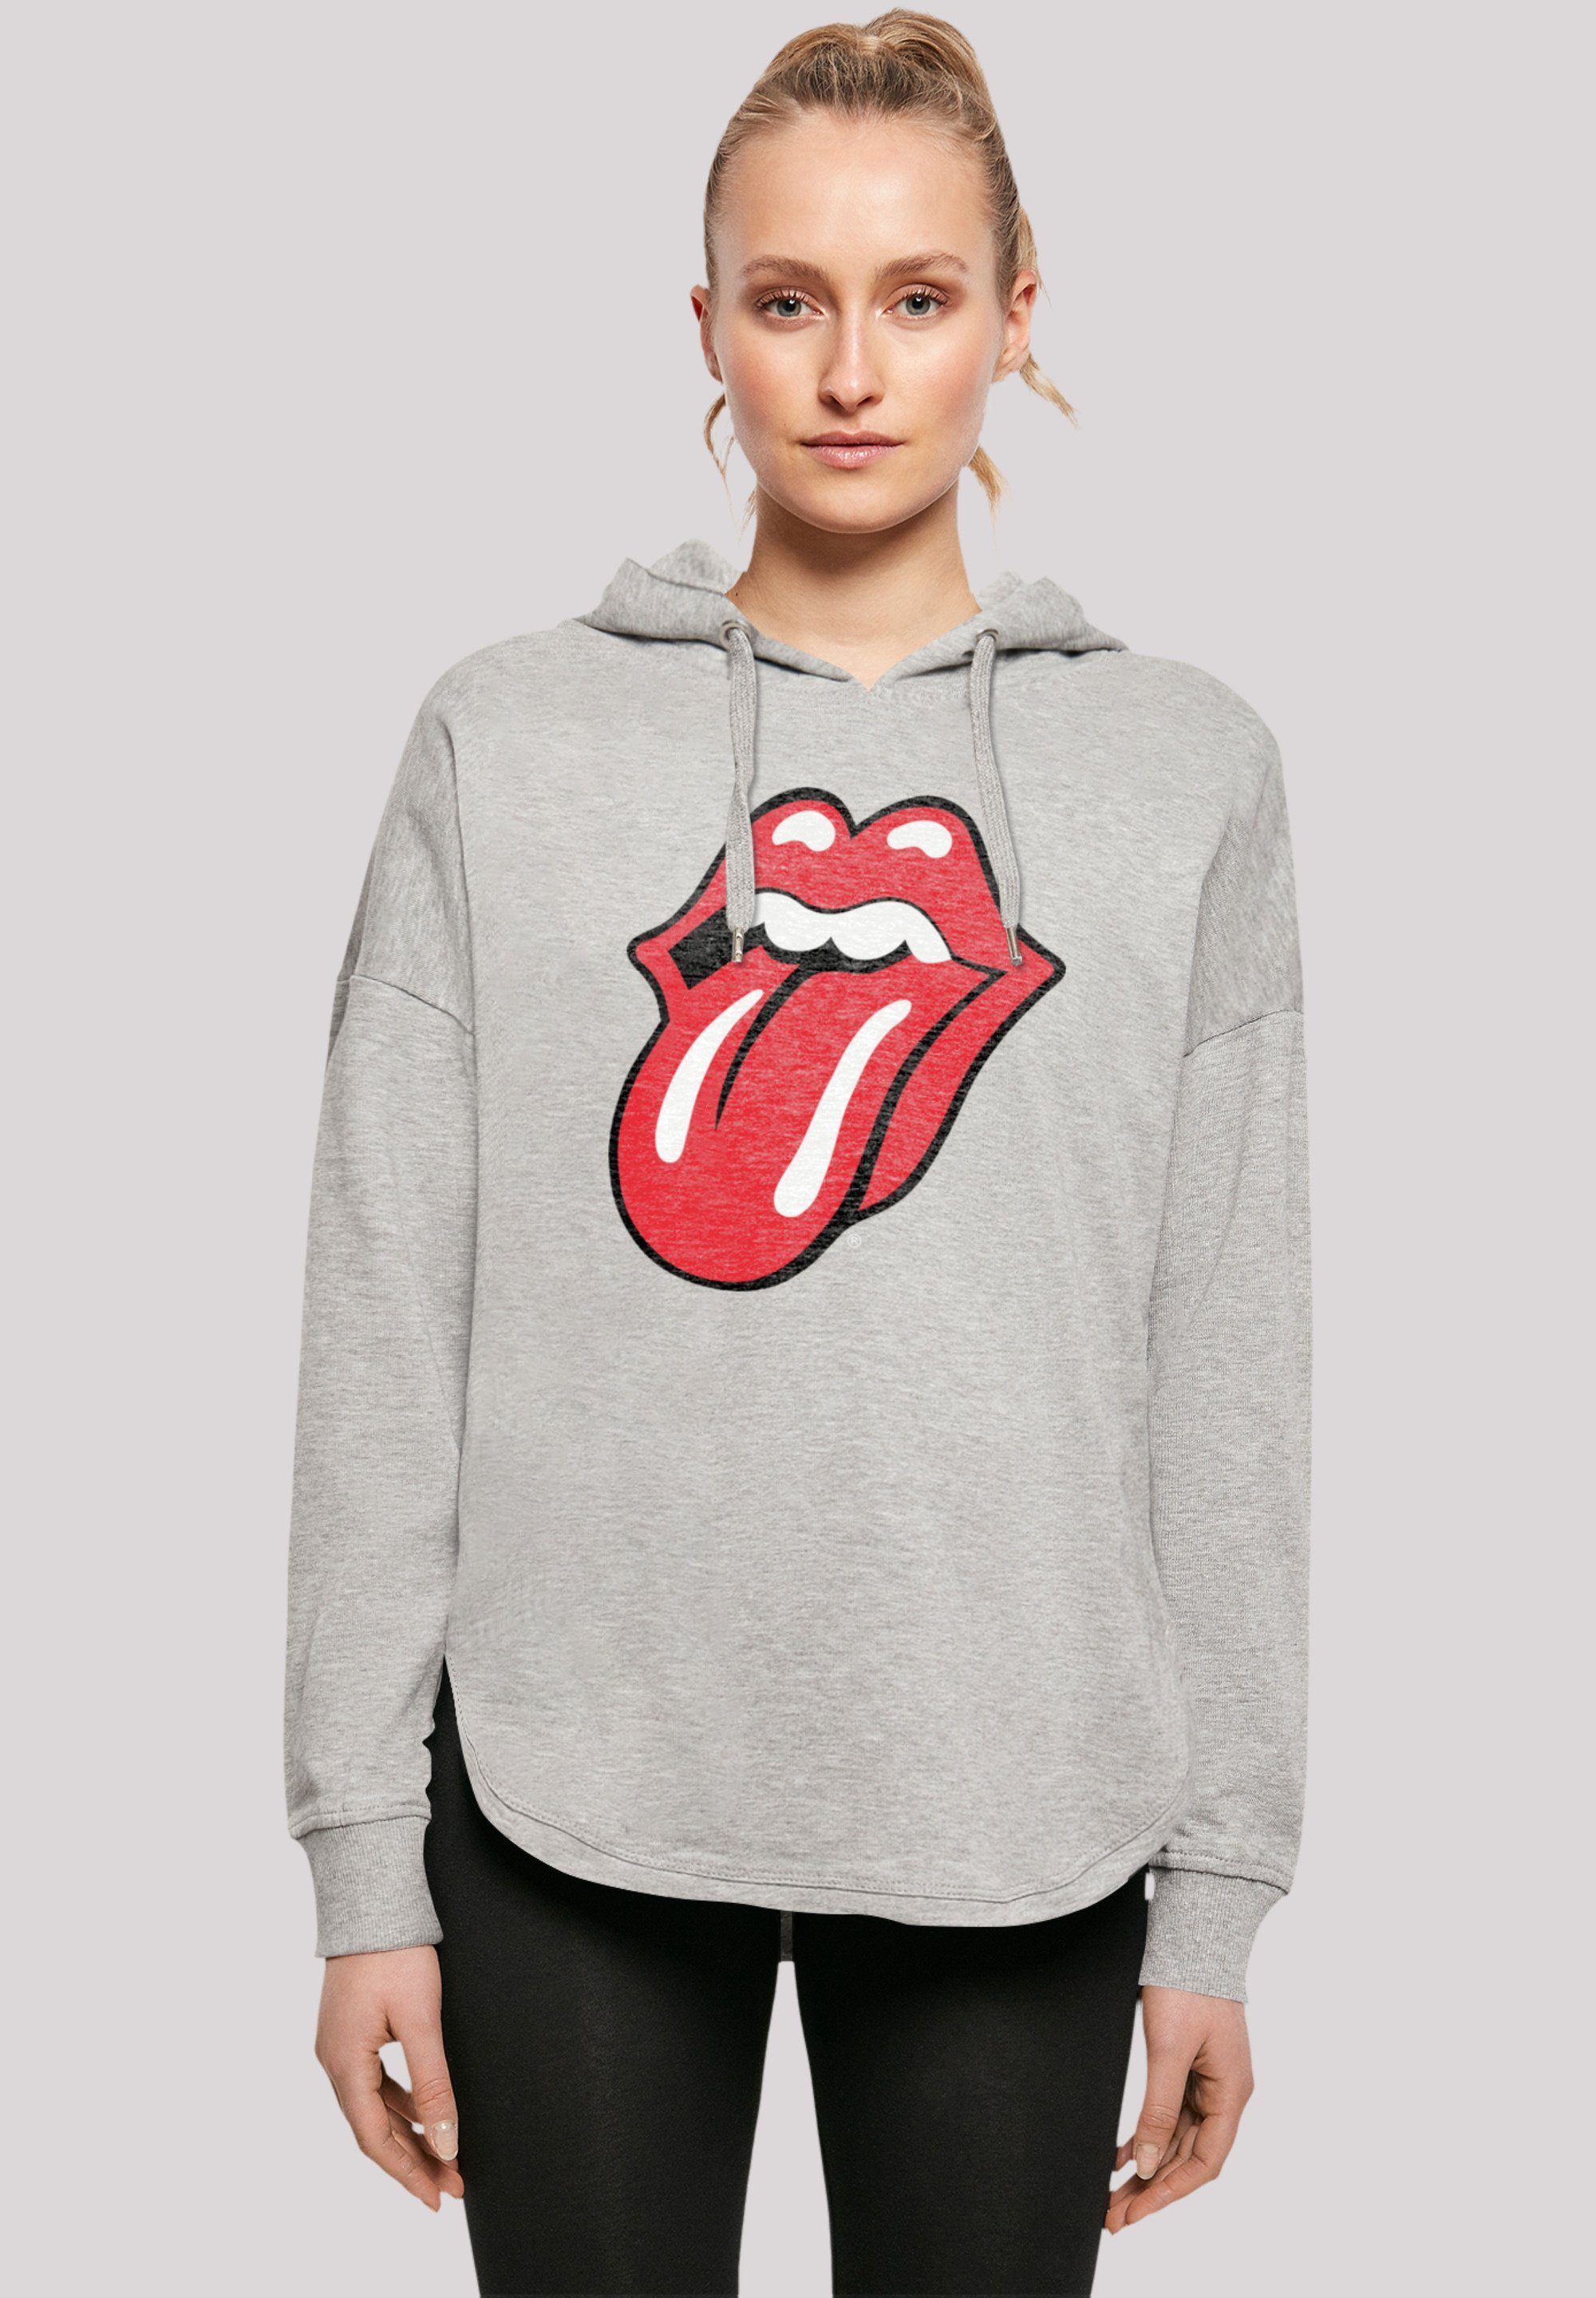 F4NT4STIC Kapuzenpullover The Rolling Stones Zunge Rot Print grey